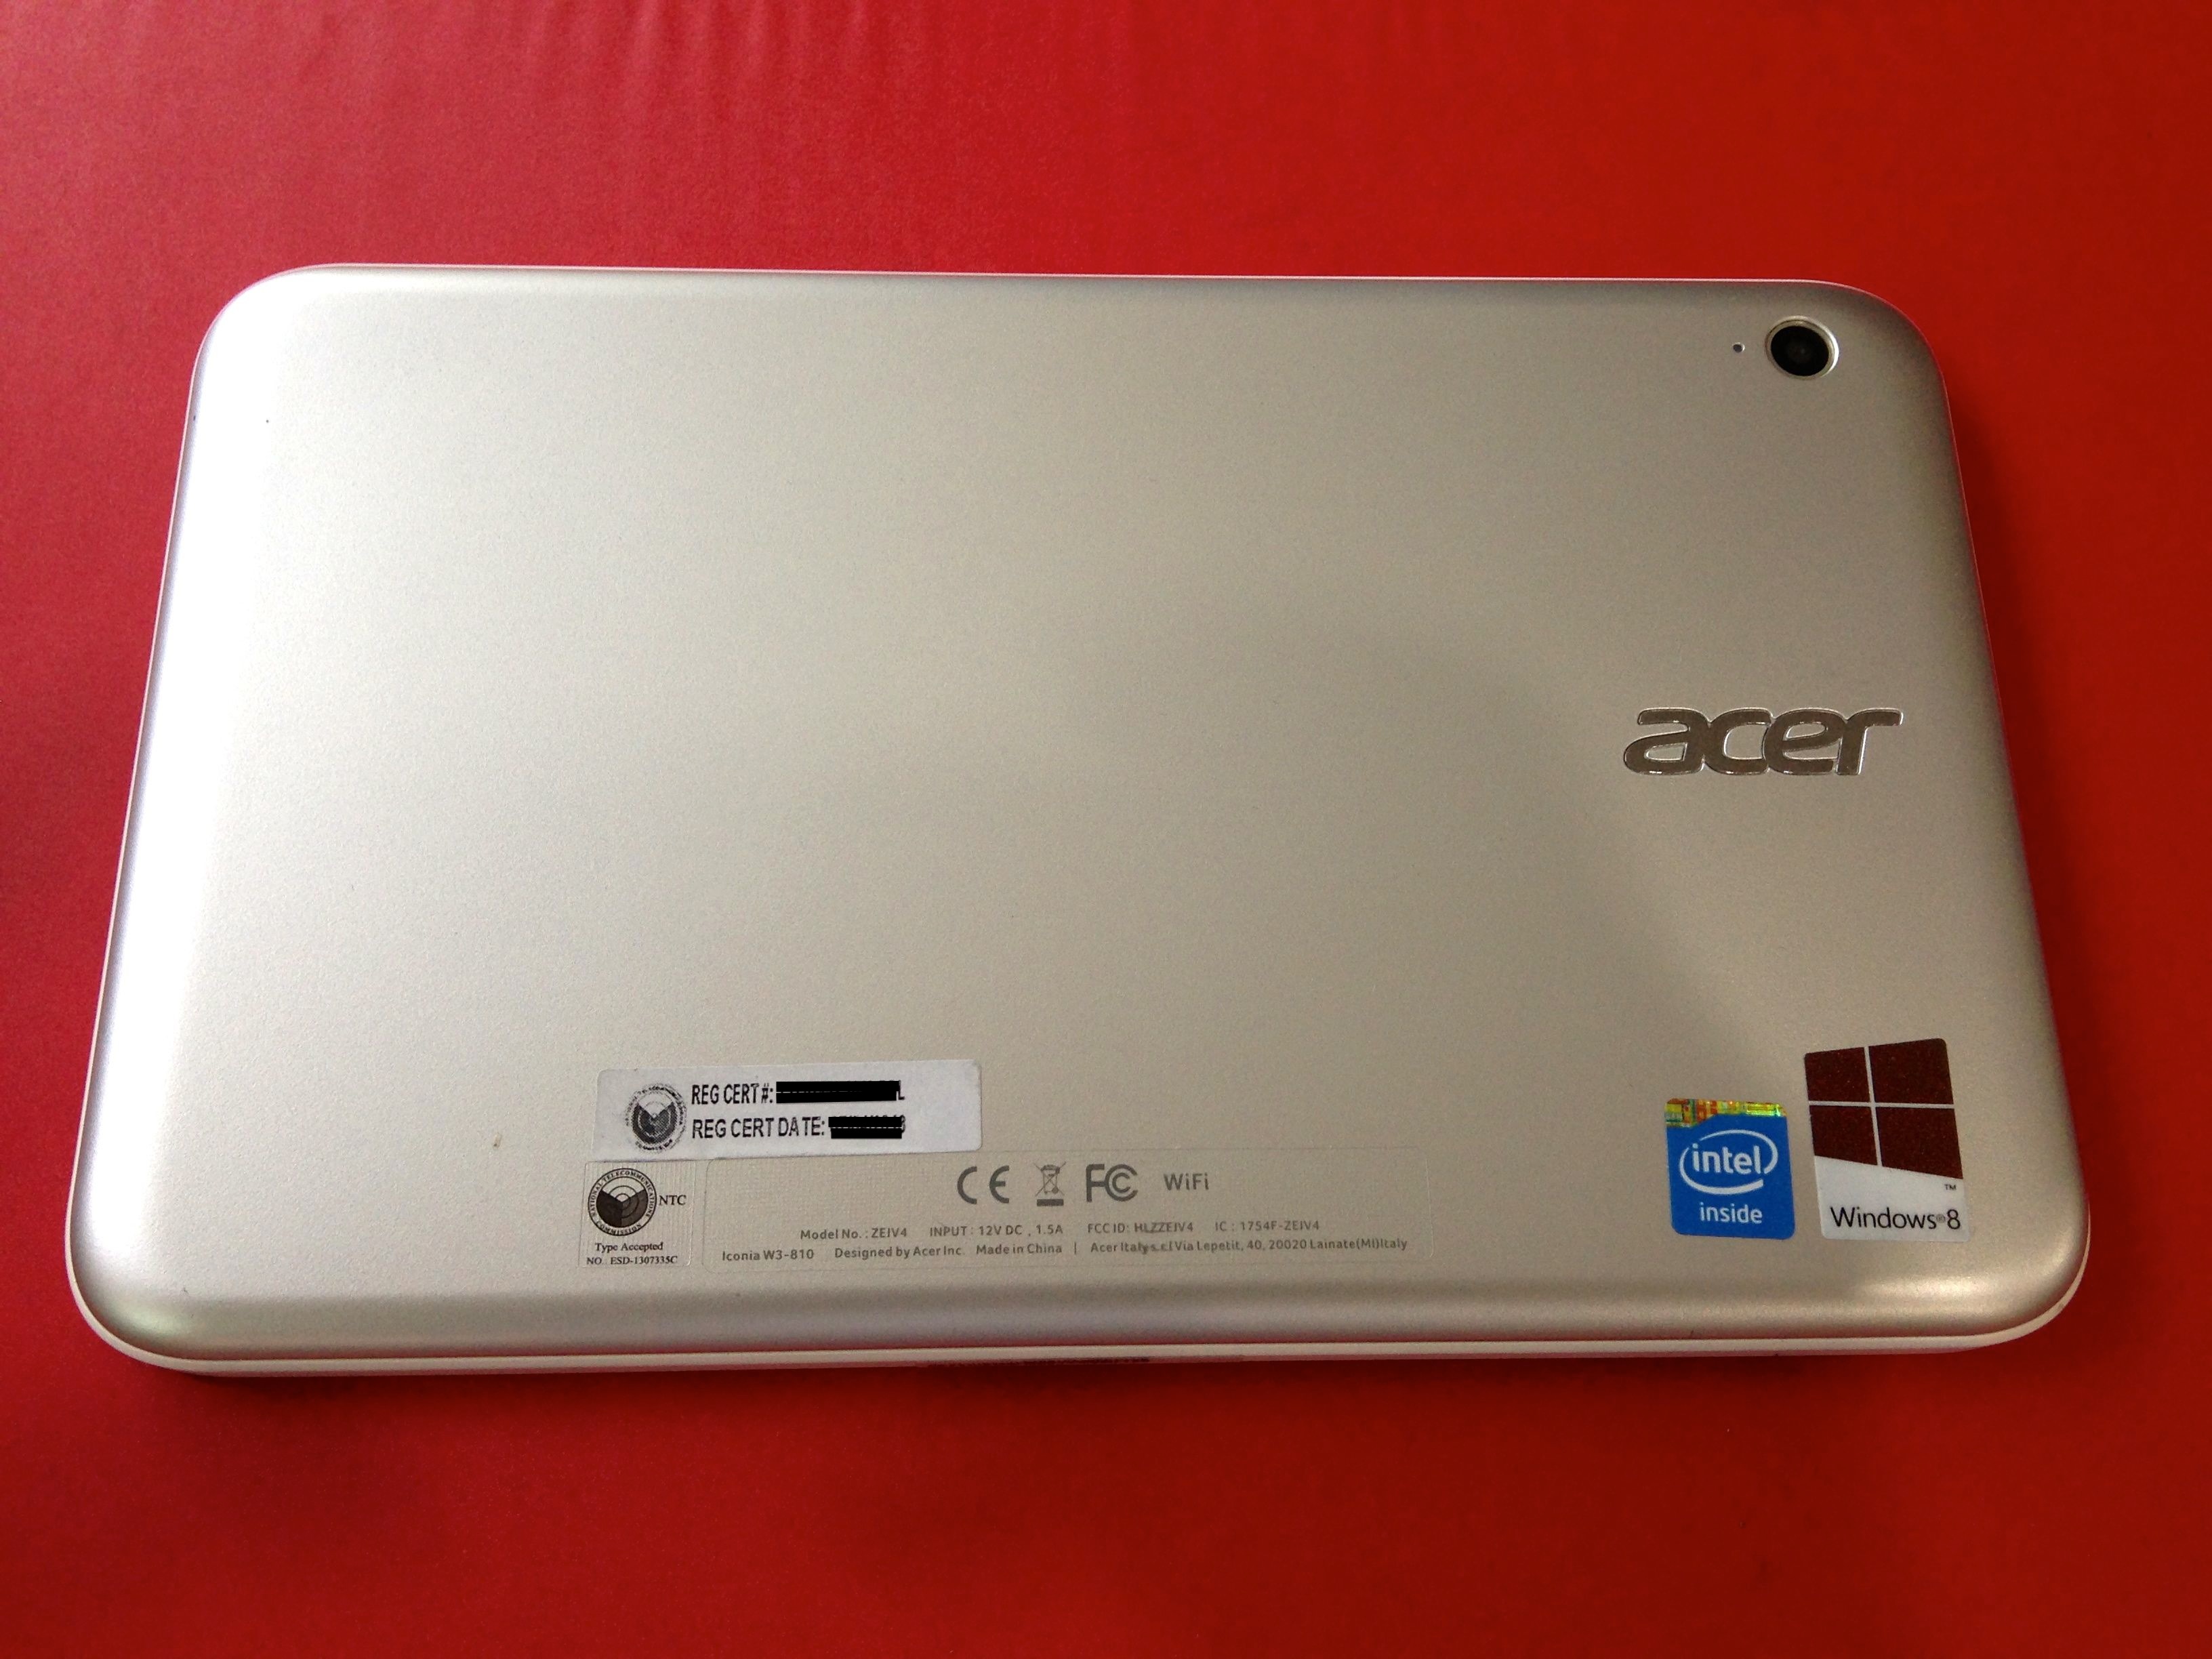 Full Review of the Acer Iconia W3-810 Windows 8 Tablet • Digital